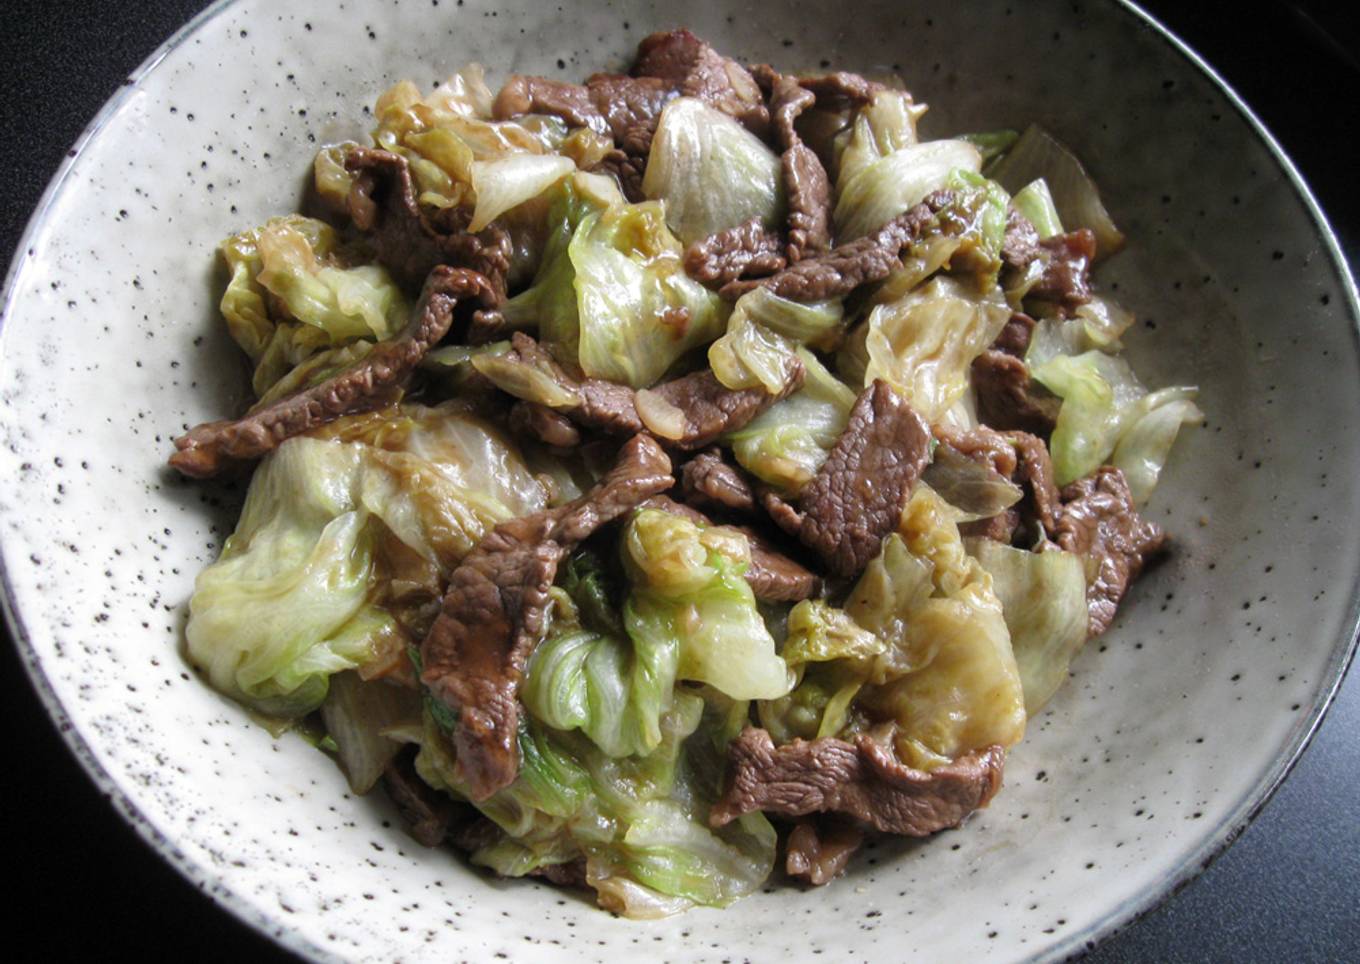 Stir-fried Beef & Iceberg Lettuce with Oyster Sauce